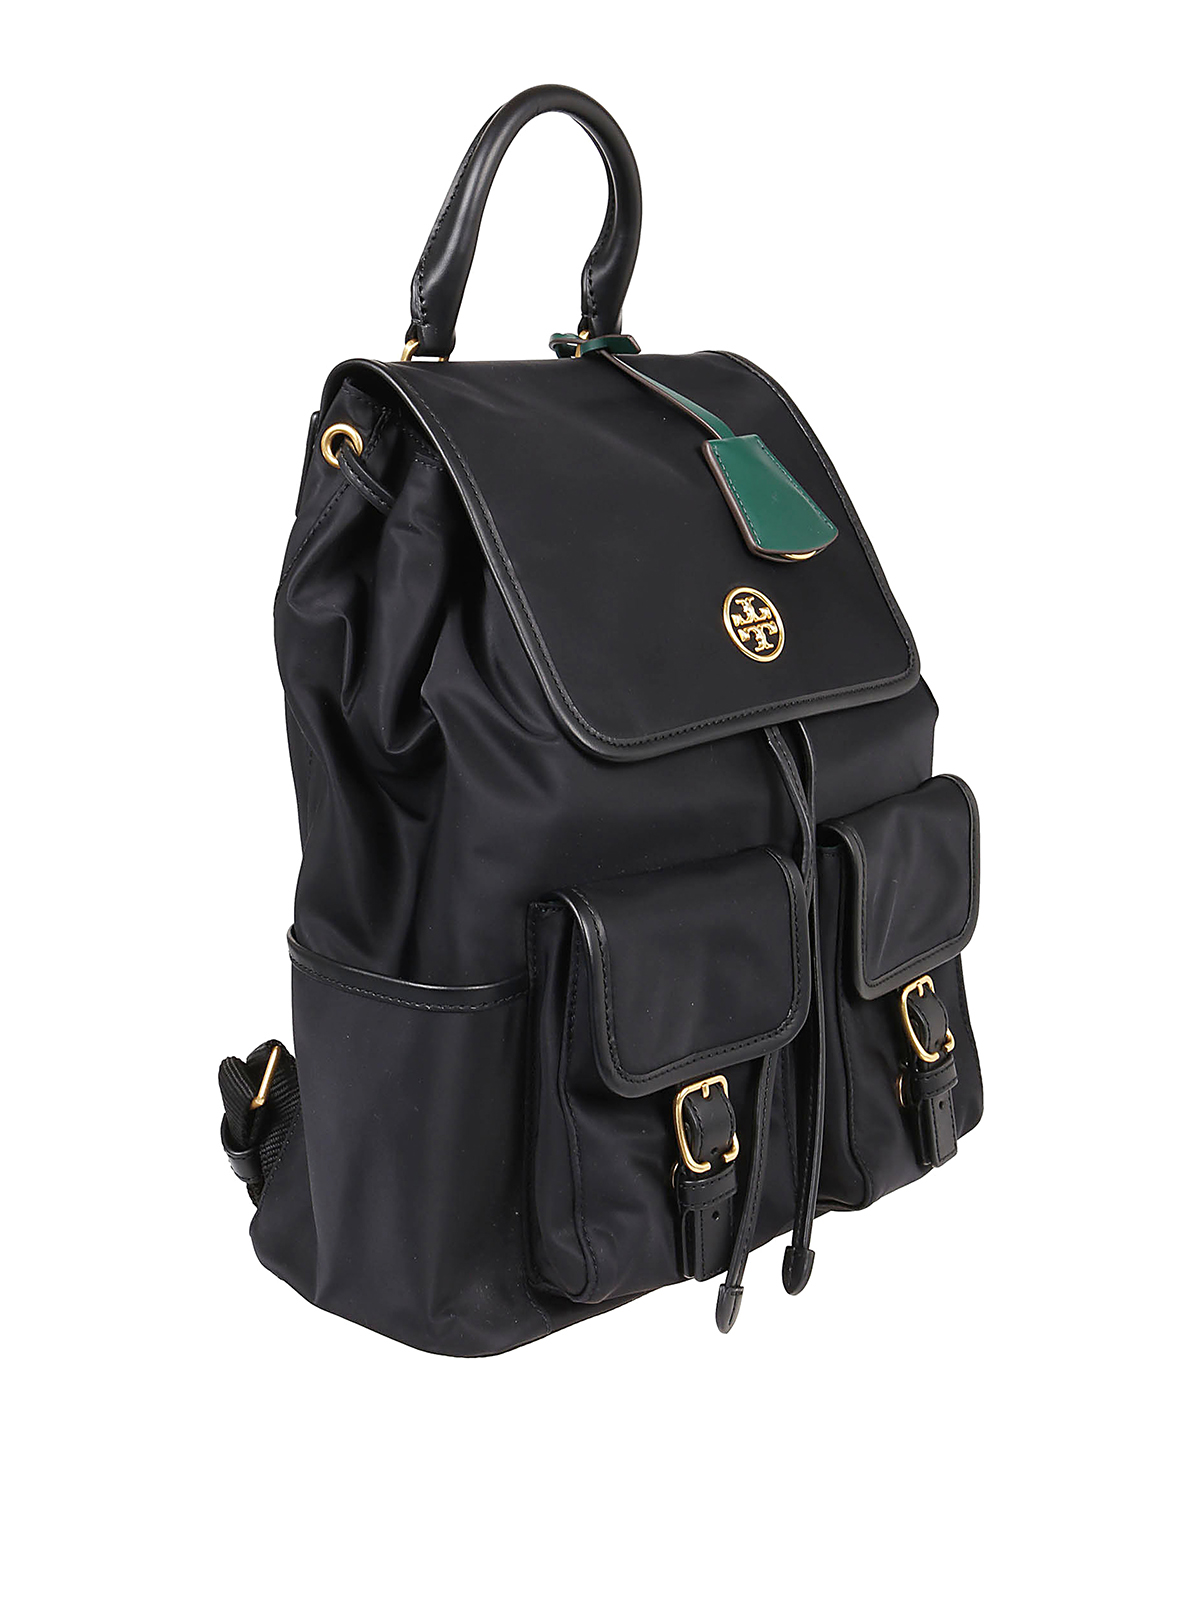 Backpacks Tory Burch - Piper backpack - 74649001 | Shop online at iKRIX